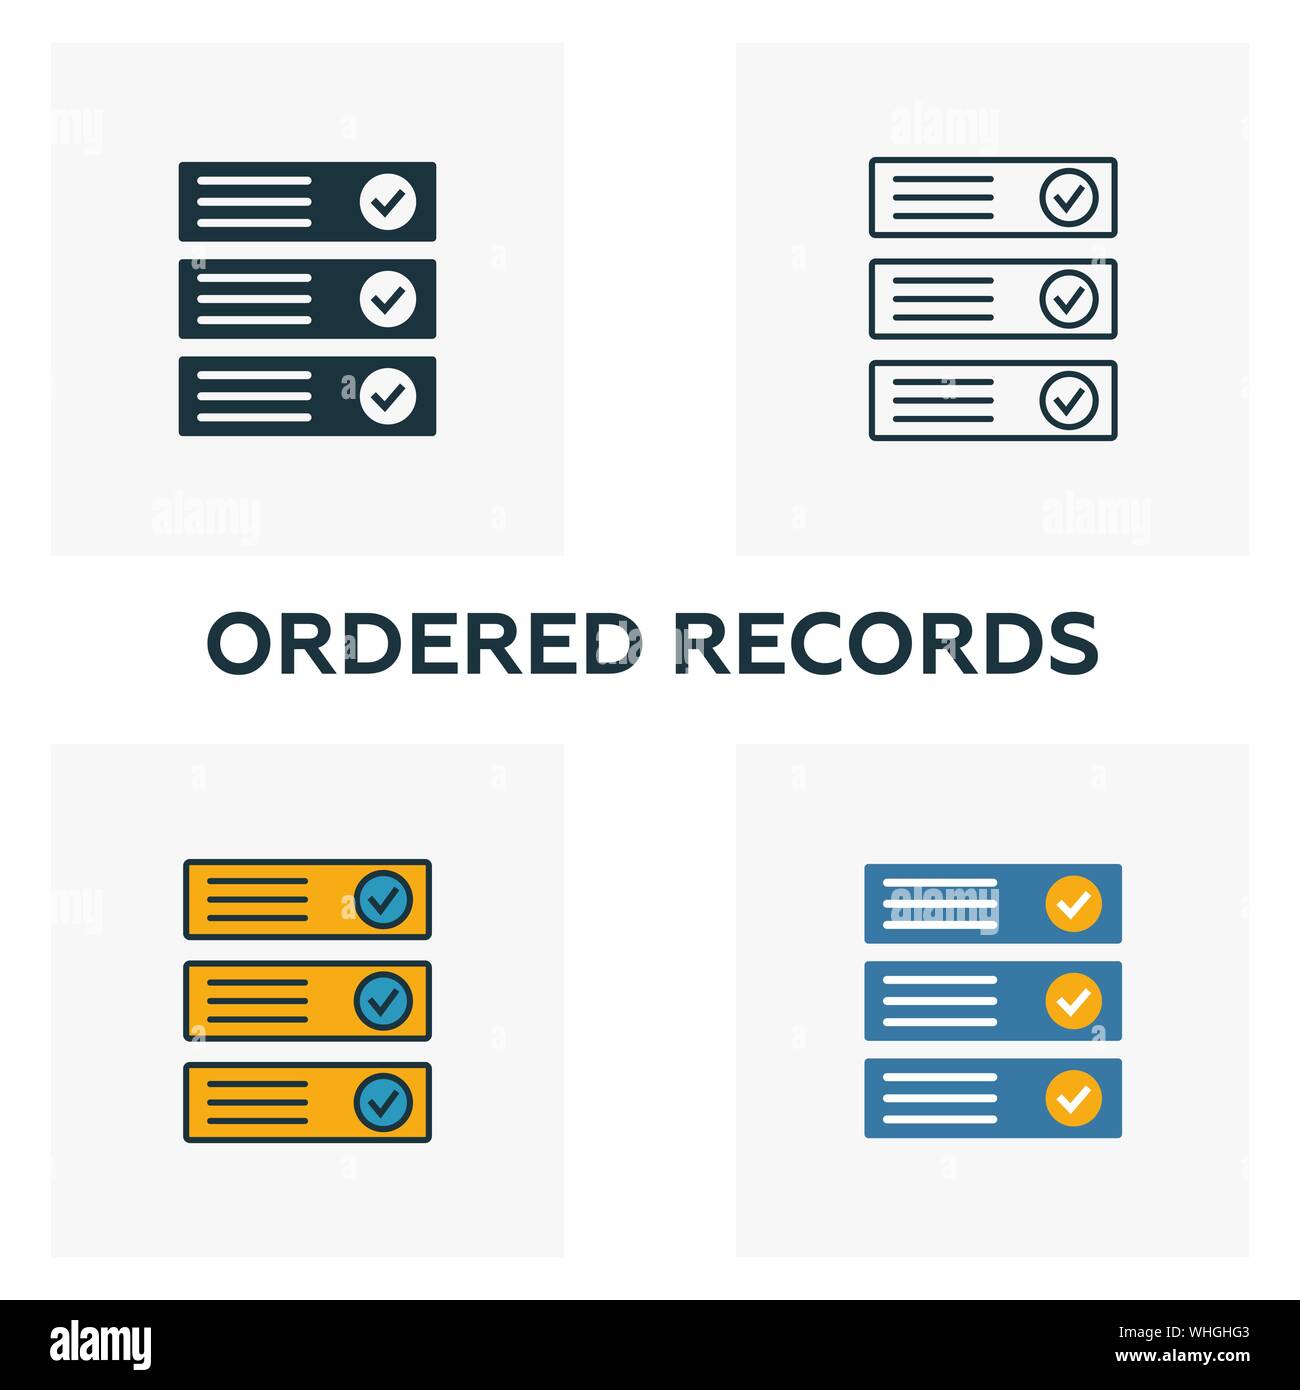 Ordered Records icon set. Four elements in diferent styles from crypto currency icons collection. Creative ordered records icons filled, outline Stock Vector